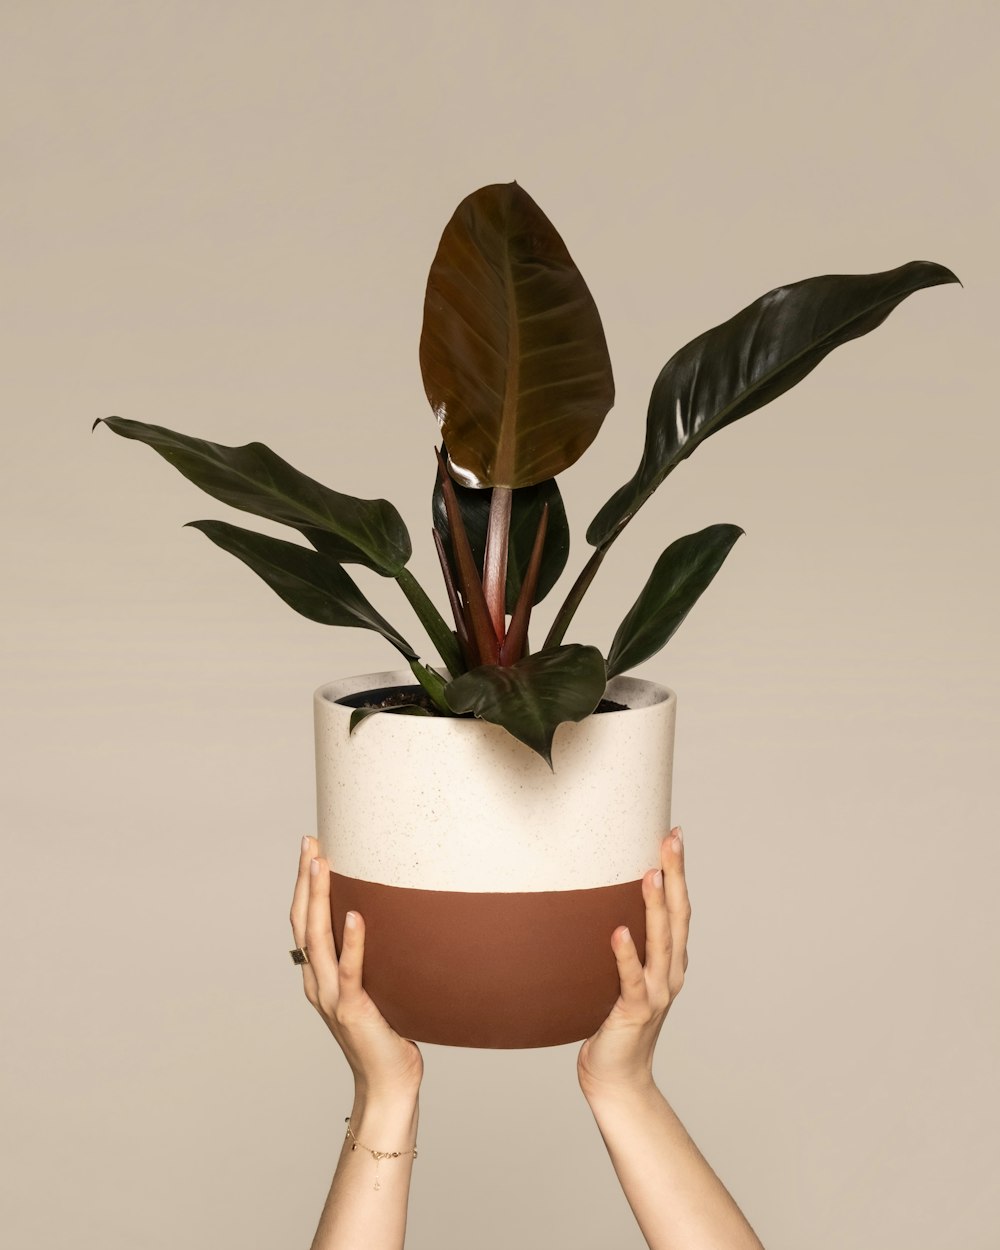 a person holding a potted plant up to their face